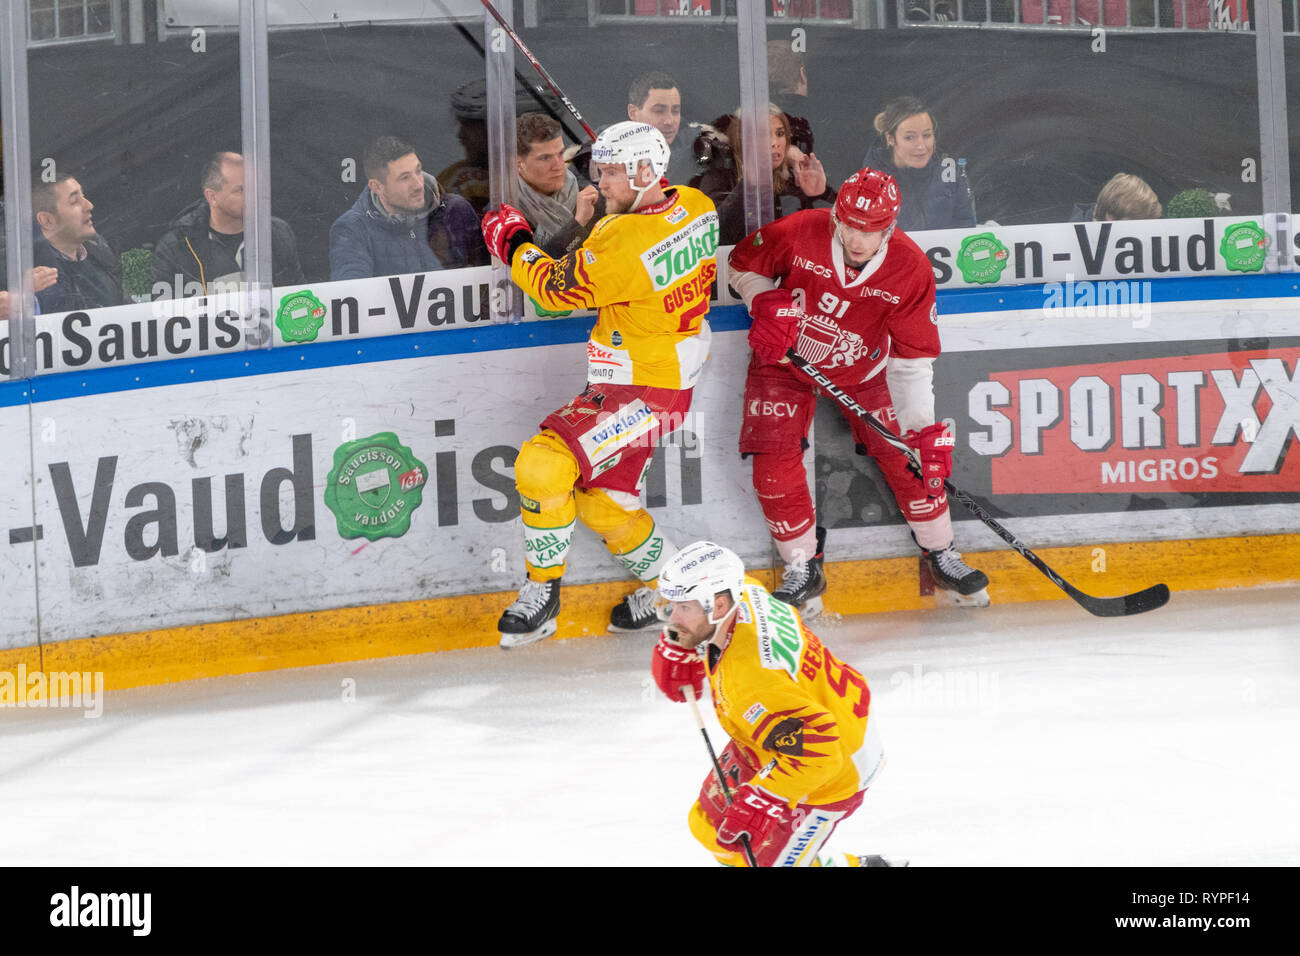 Lausanne, Switzerland. 14th March, 2019. LNA SWISS ICE HOCKEY LAUSANNE HC VS SCL TIGERS- Lausanne Hc Vs HC SCL Tigers at Vaudoise Arena, Lausanne (Play-offs,  Quarter Finals Act III), 14-03-2019. Credit: Eric Dubost/Alamy Live News Stock Photo